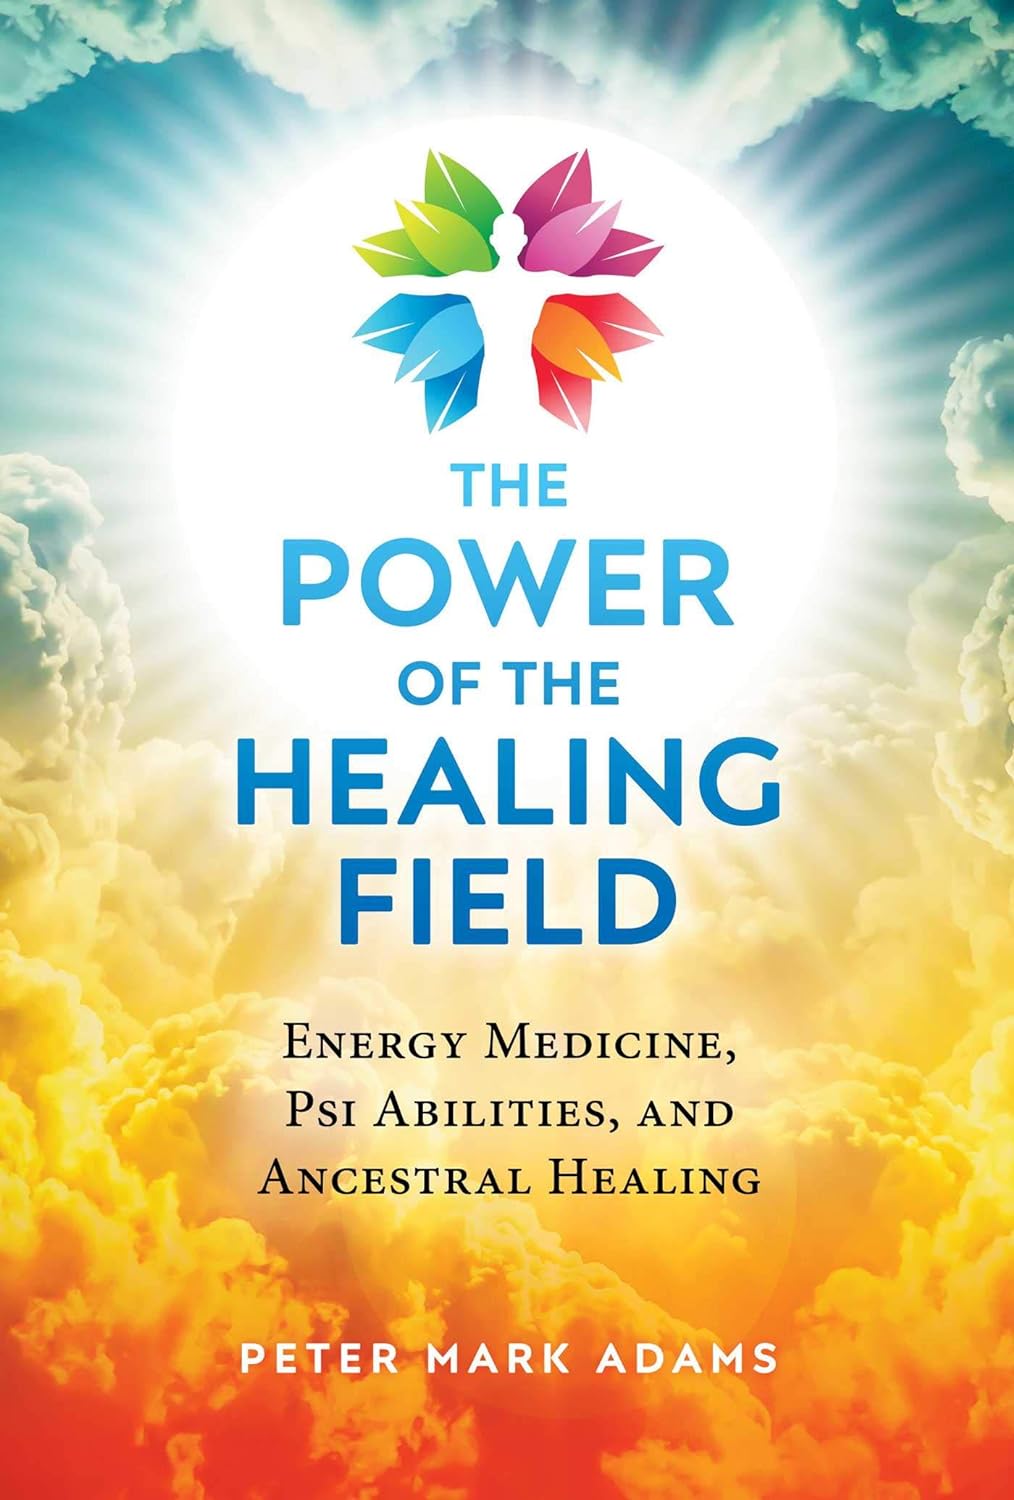 The Power Of The Healing Field: Energy Medicine, Psi Abilities, And Ancestral Healing